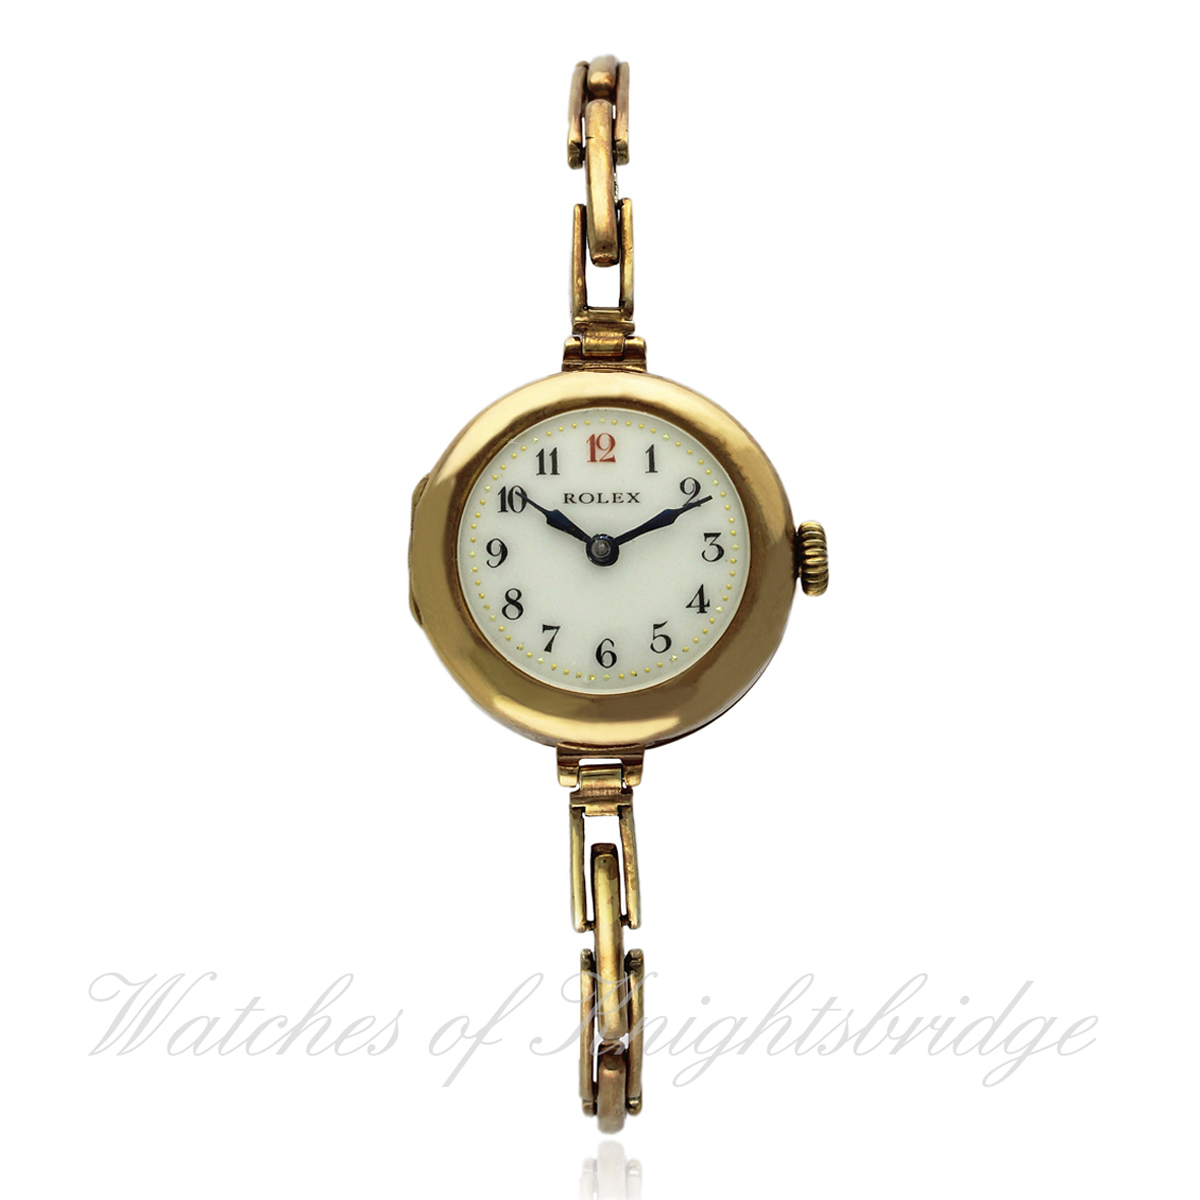 A LADIES 9CT SOLID GOLD ROLEX BRACELET WATCH CIRCA 1920s D: White enamel dial with applied Arabic